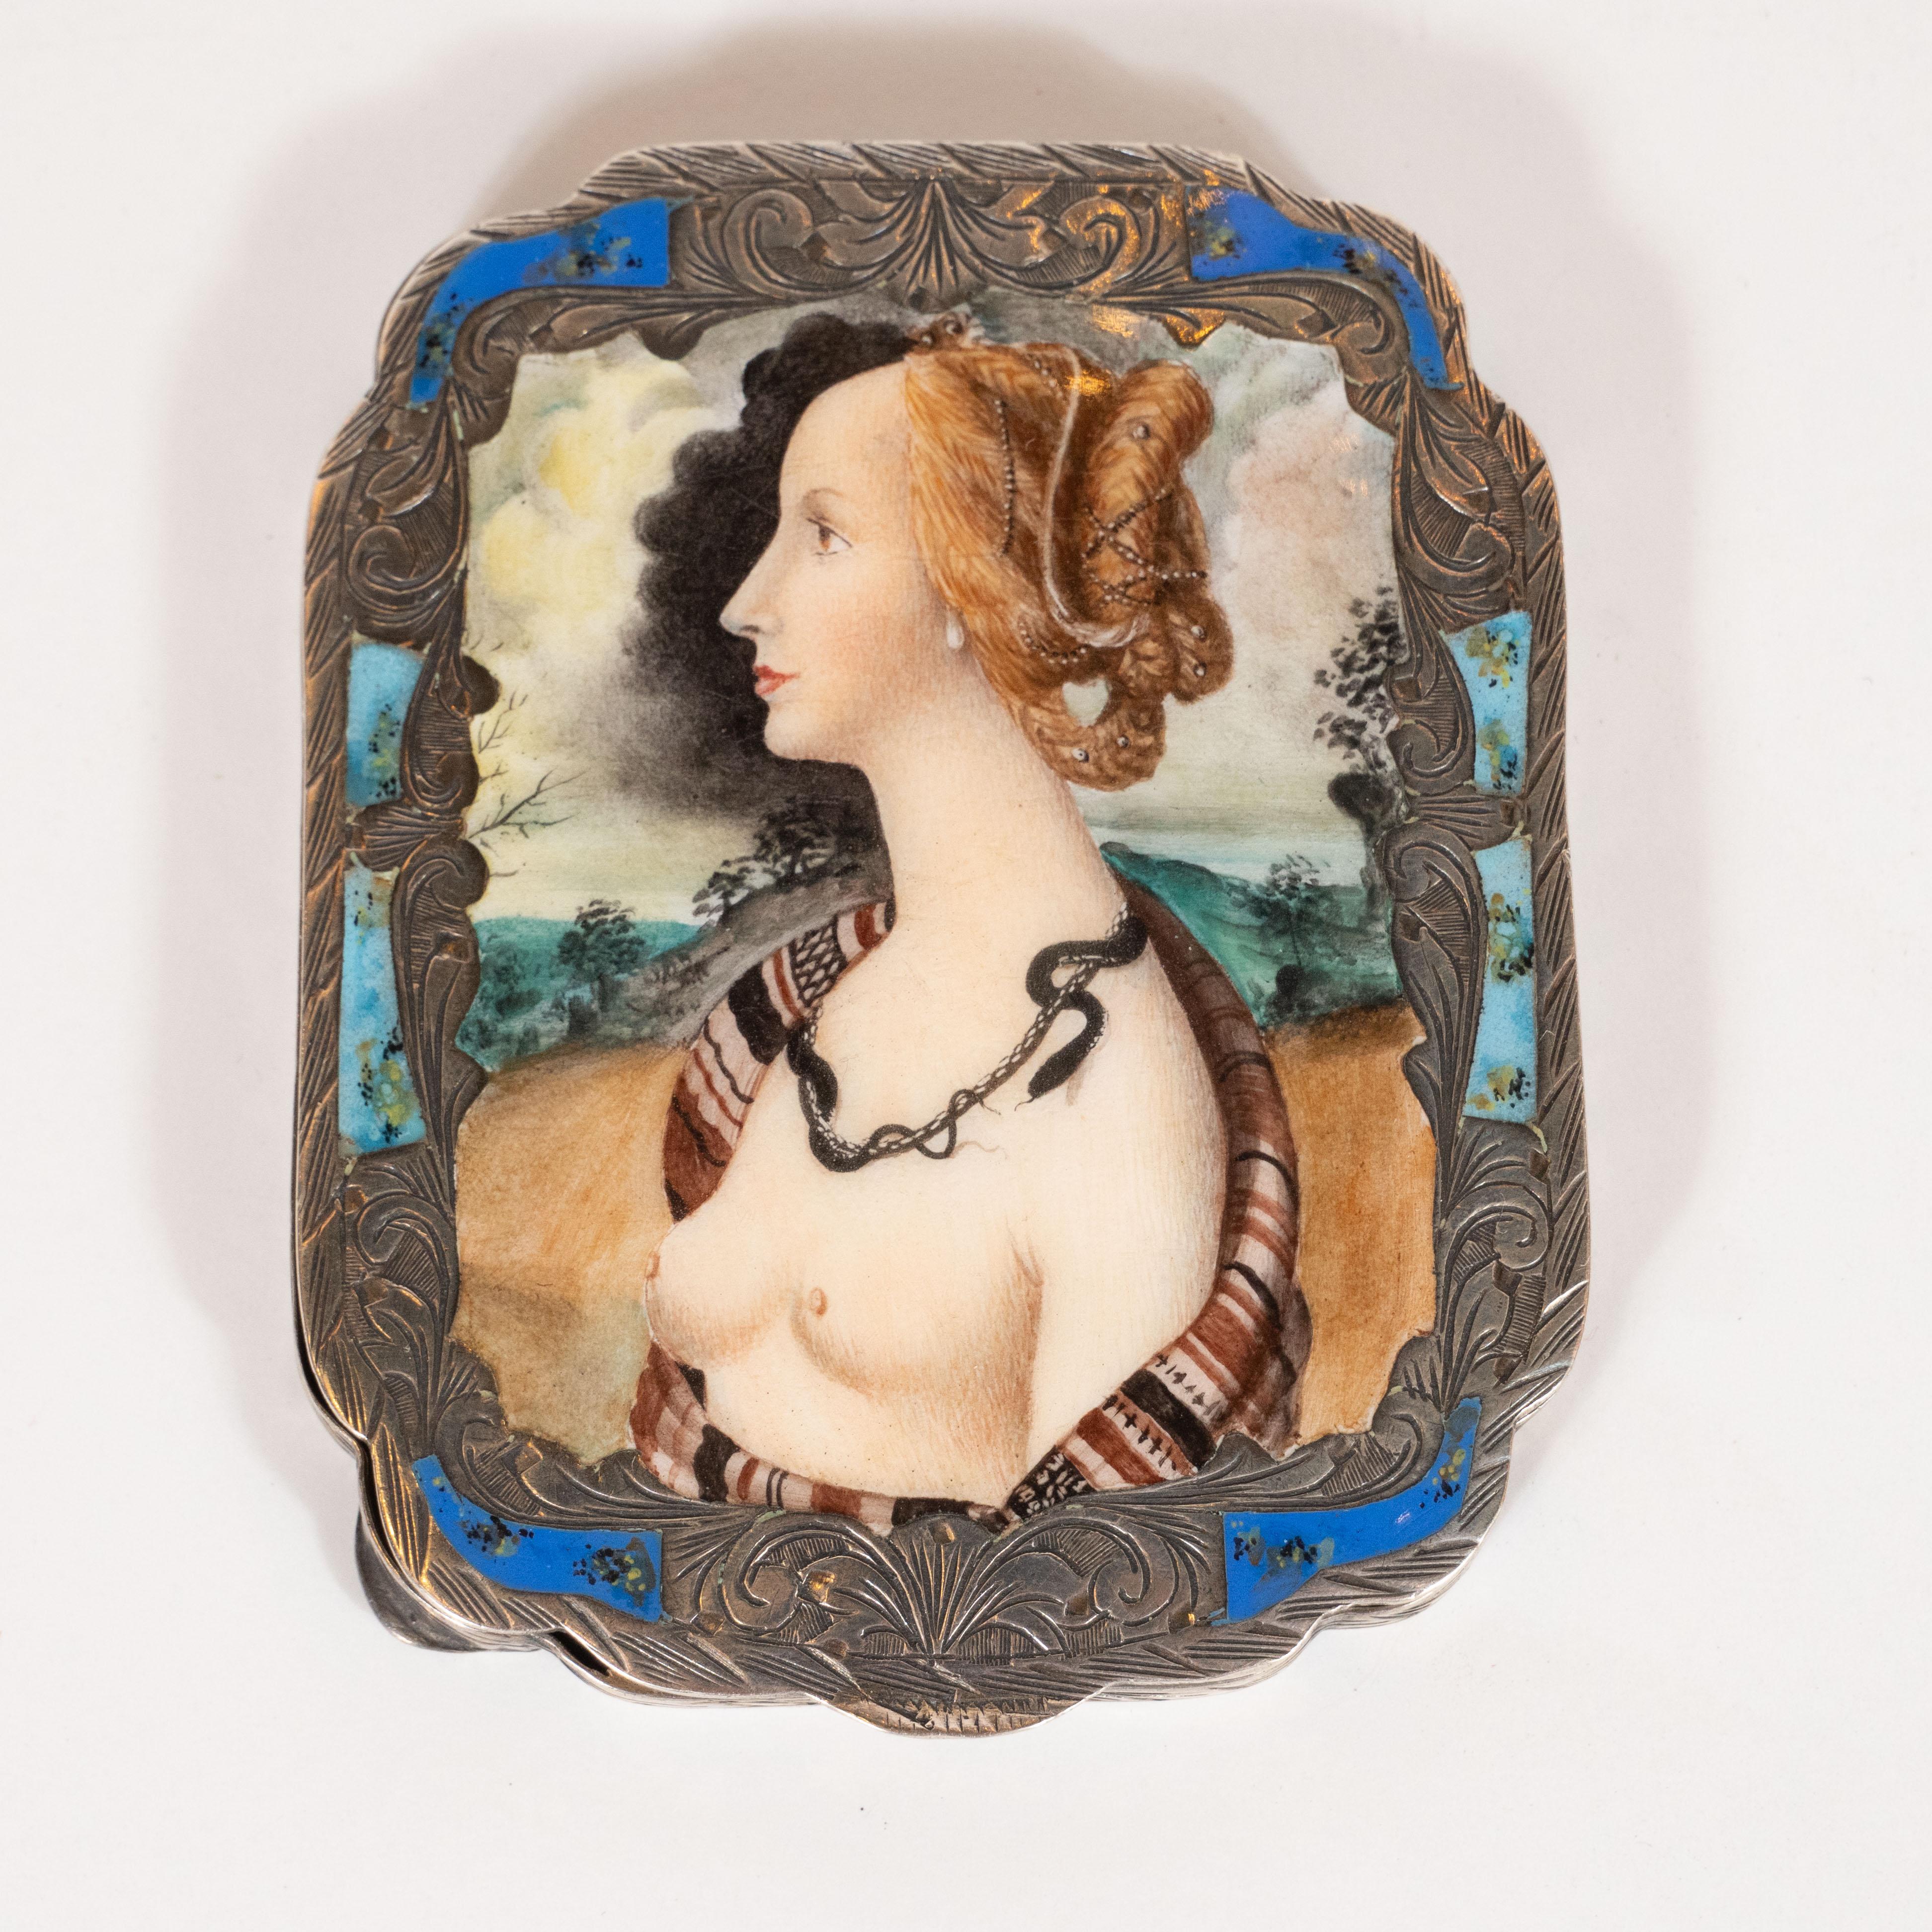 This elegant compact mirror was realized, by hand, in Florence, Italy, circa 1900. It features in octagonal body with an open compartment at bottom- perfect as a tin for storing makeup, mints or any number of items- and a plain mirror inset into the